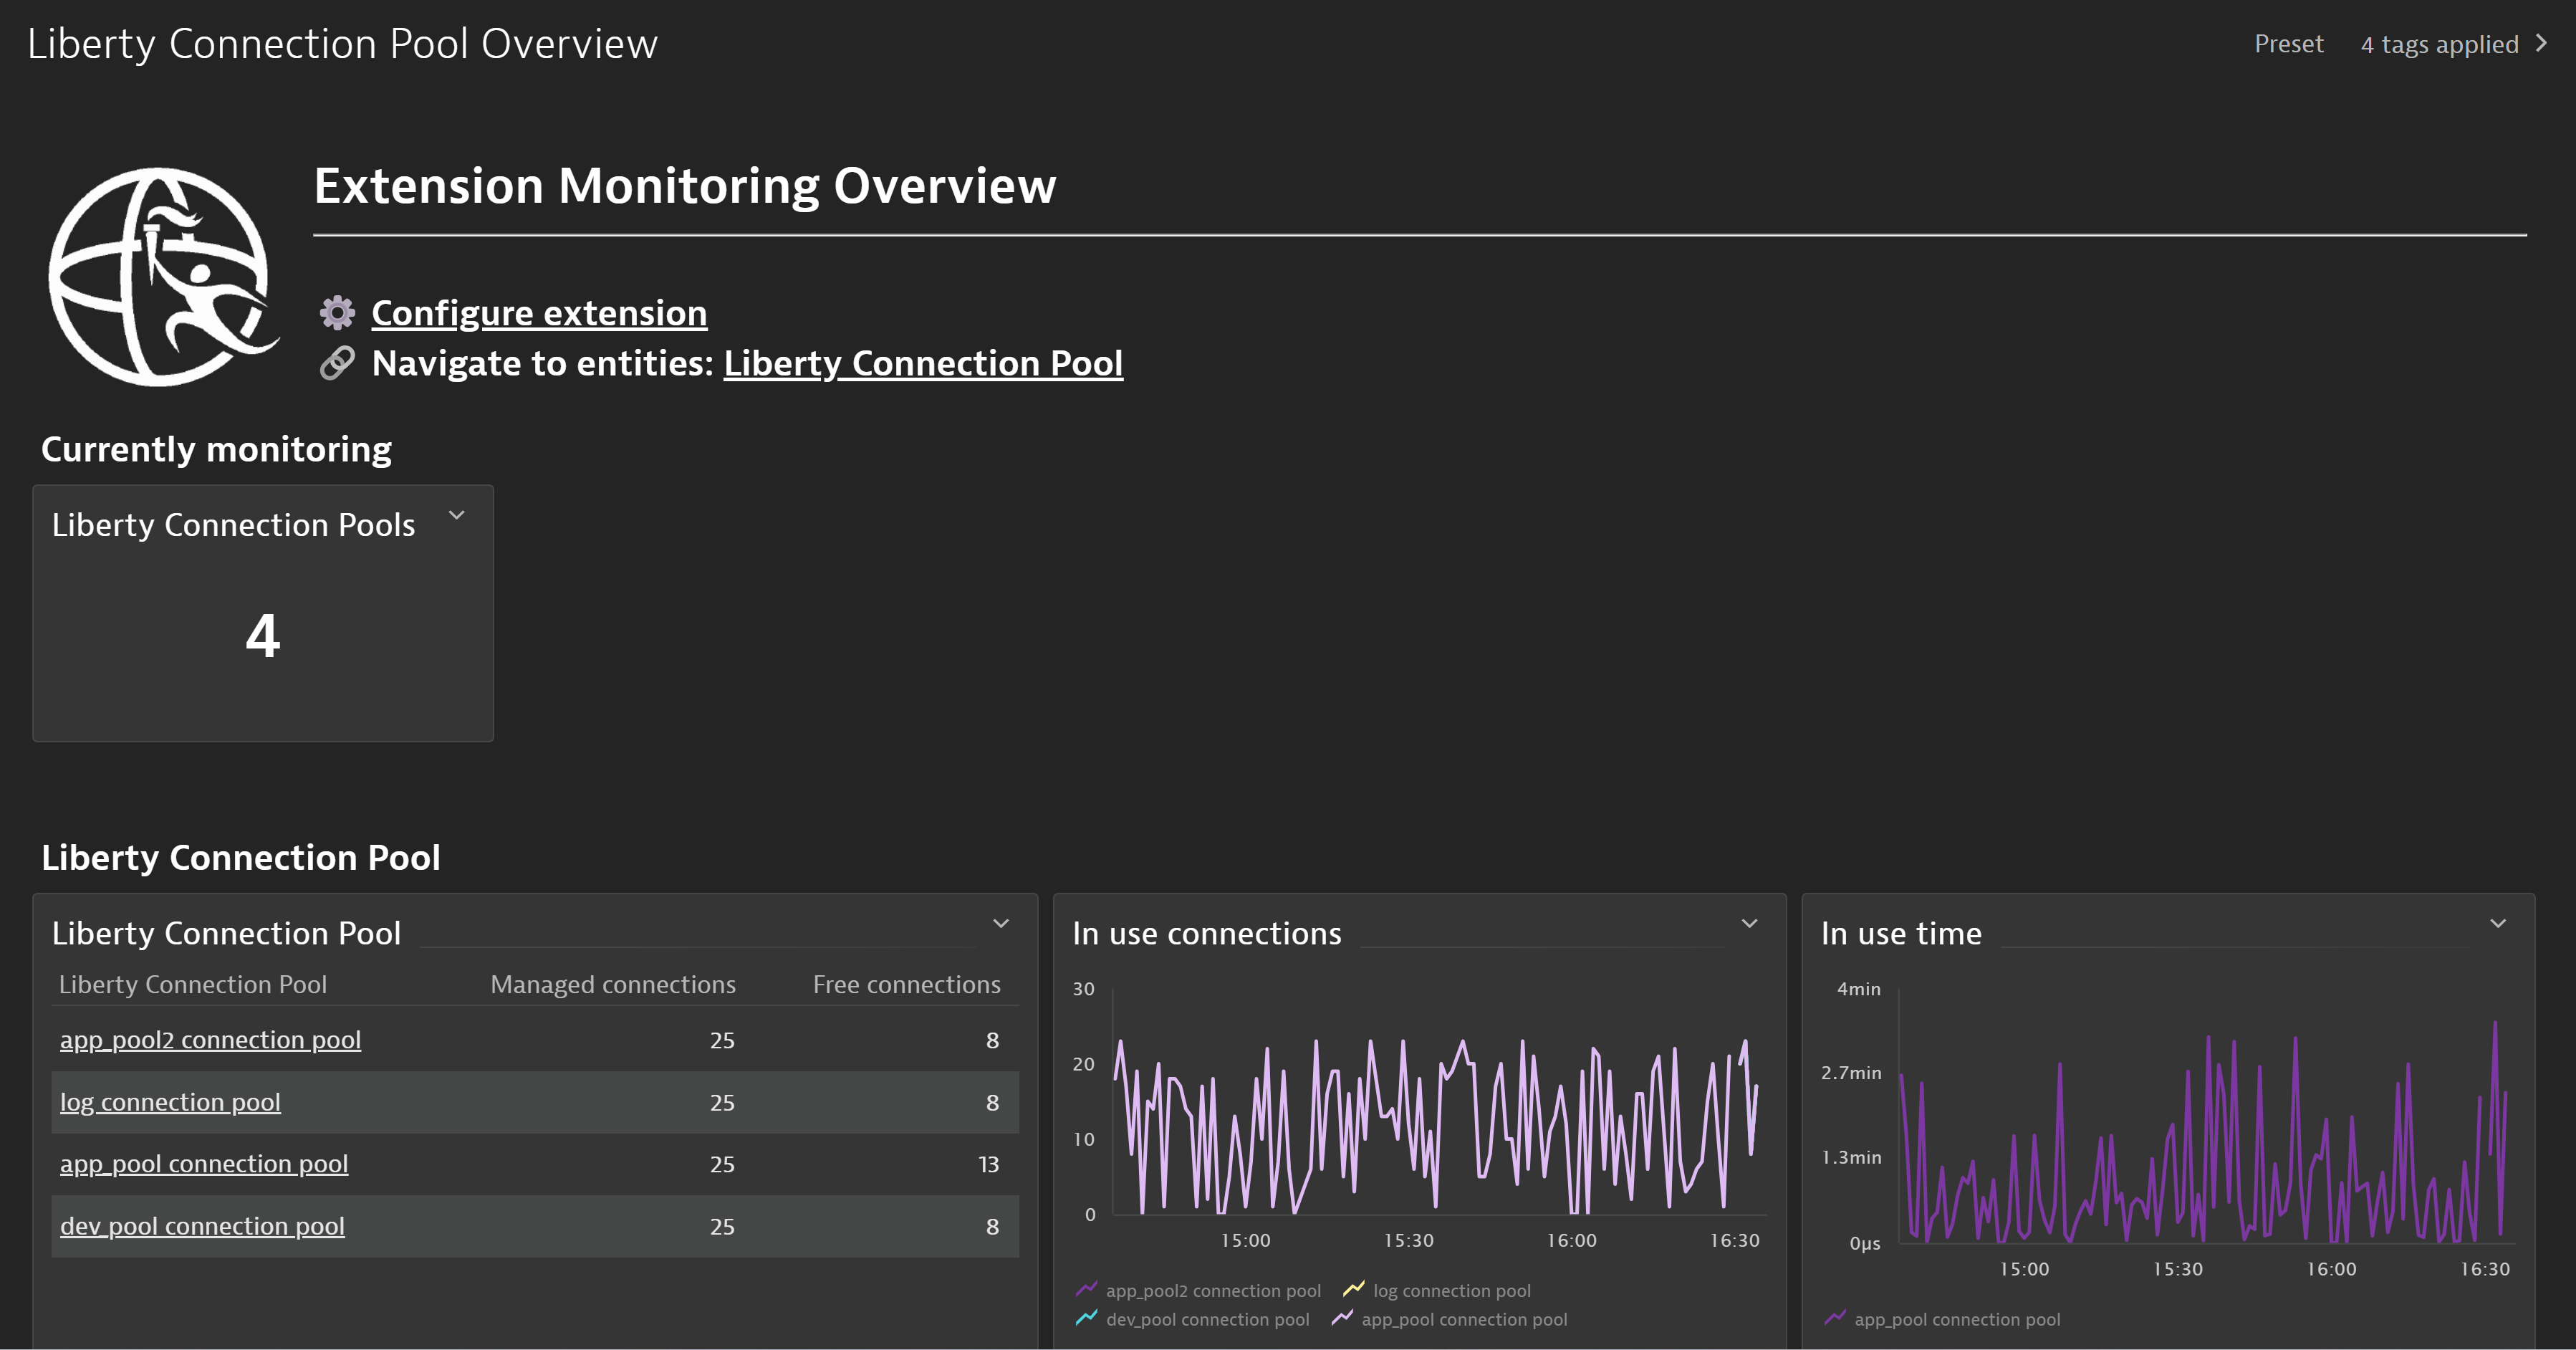 Easily monitor all your Websphere Liberty connection pools in your environment thanks to the overview dashboard, automatically included with the extension activation.